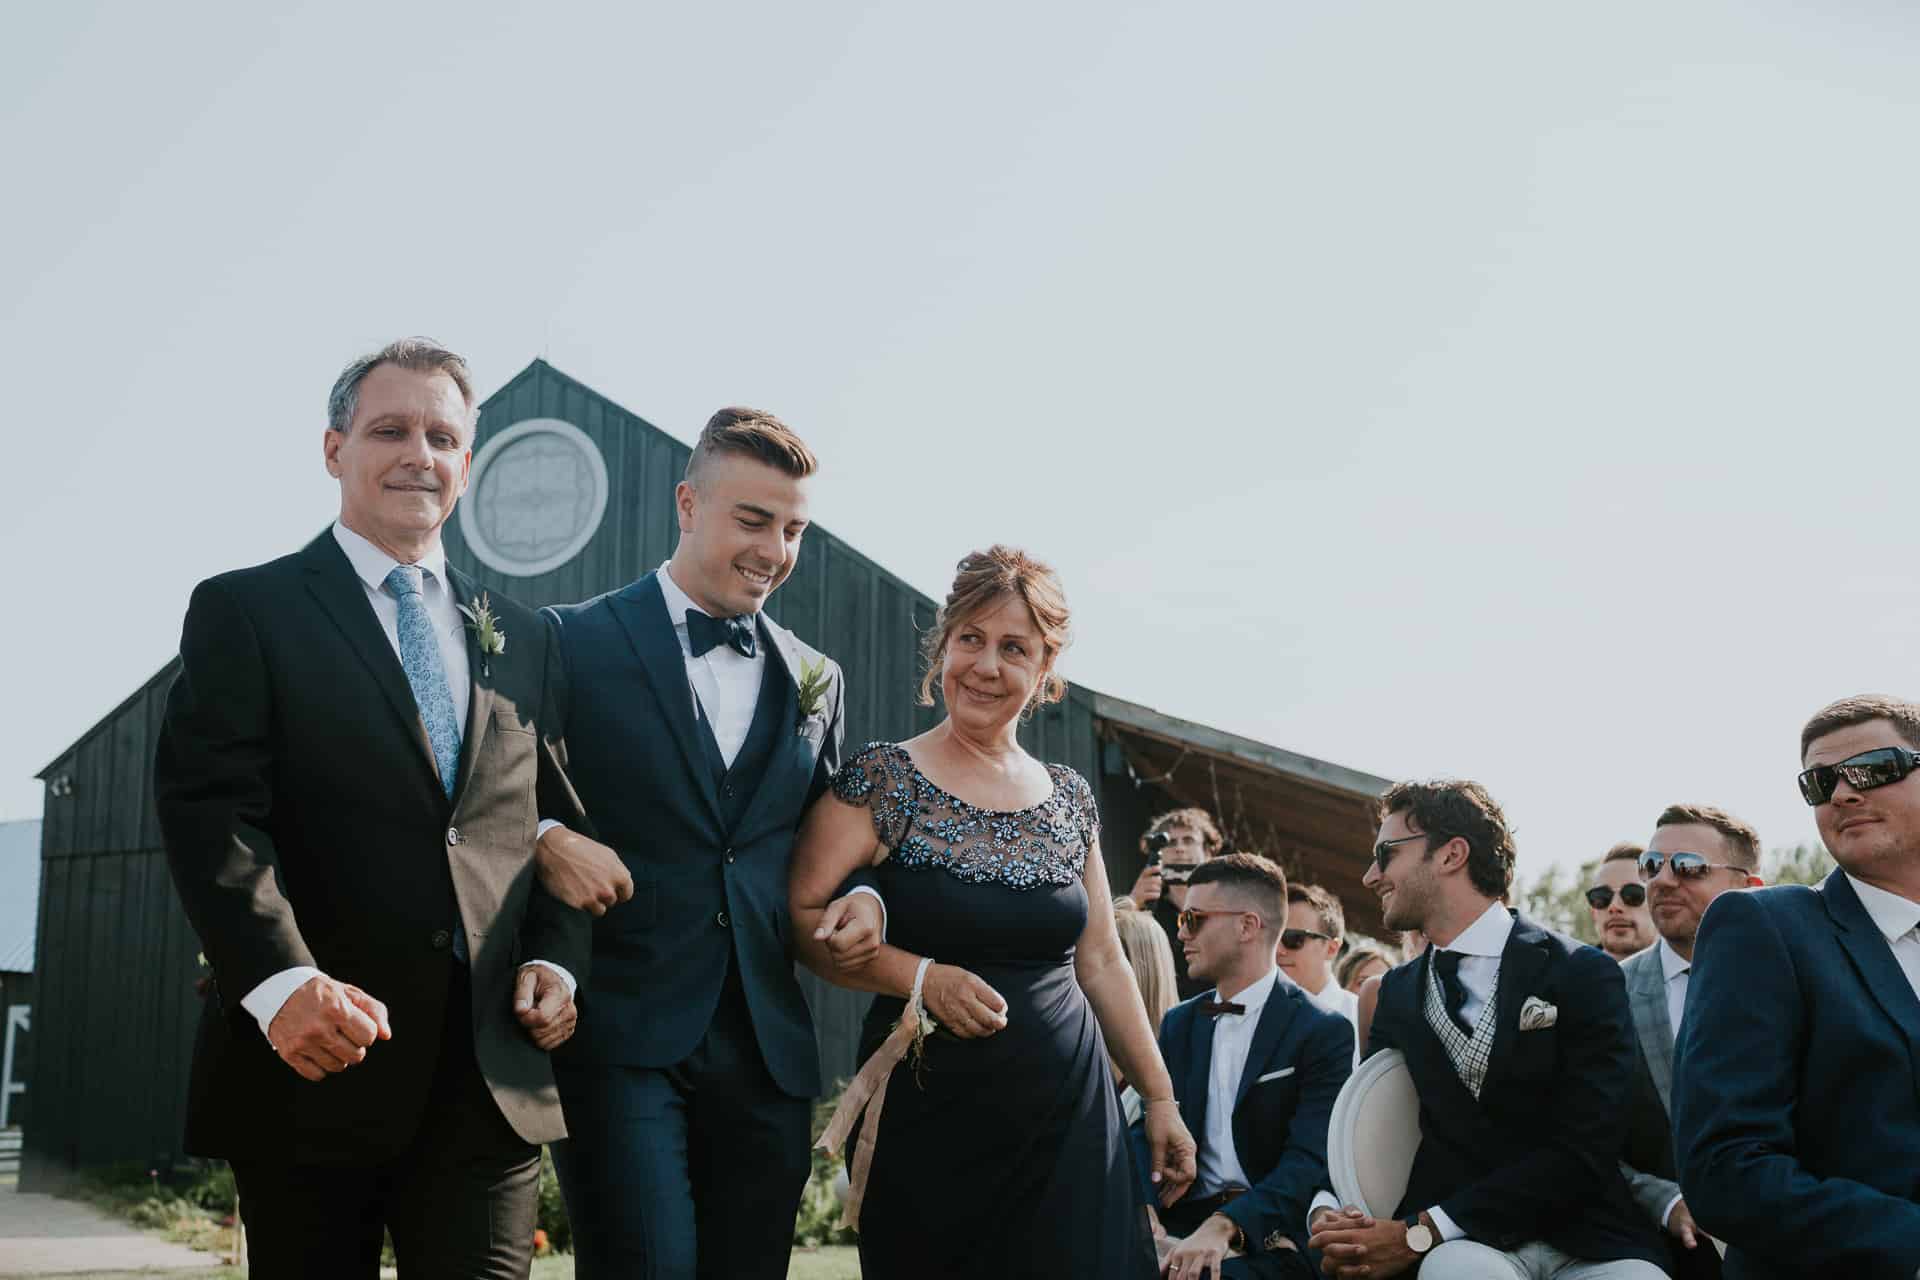 Elegant Country Wedding - Joel and Justyna Bedford Photography - Pageau Wedding